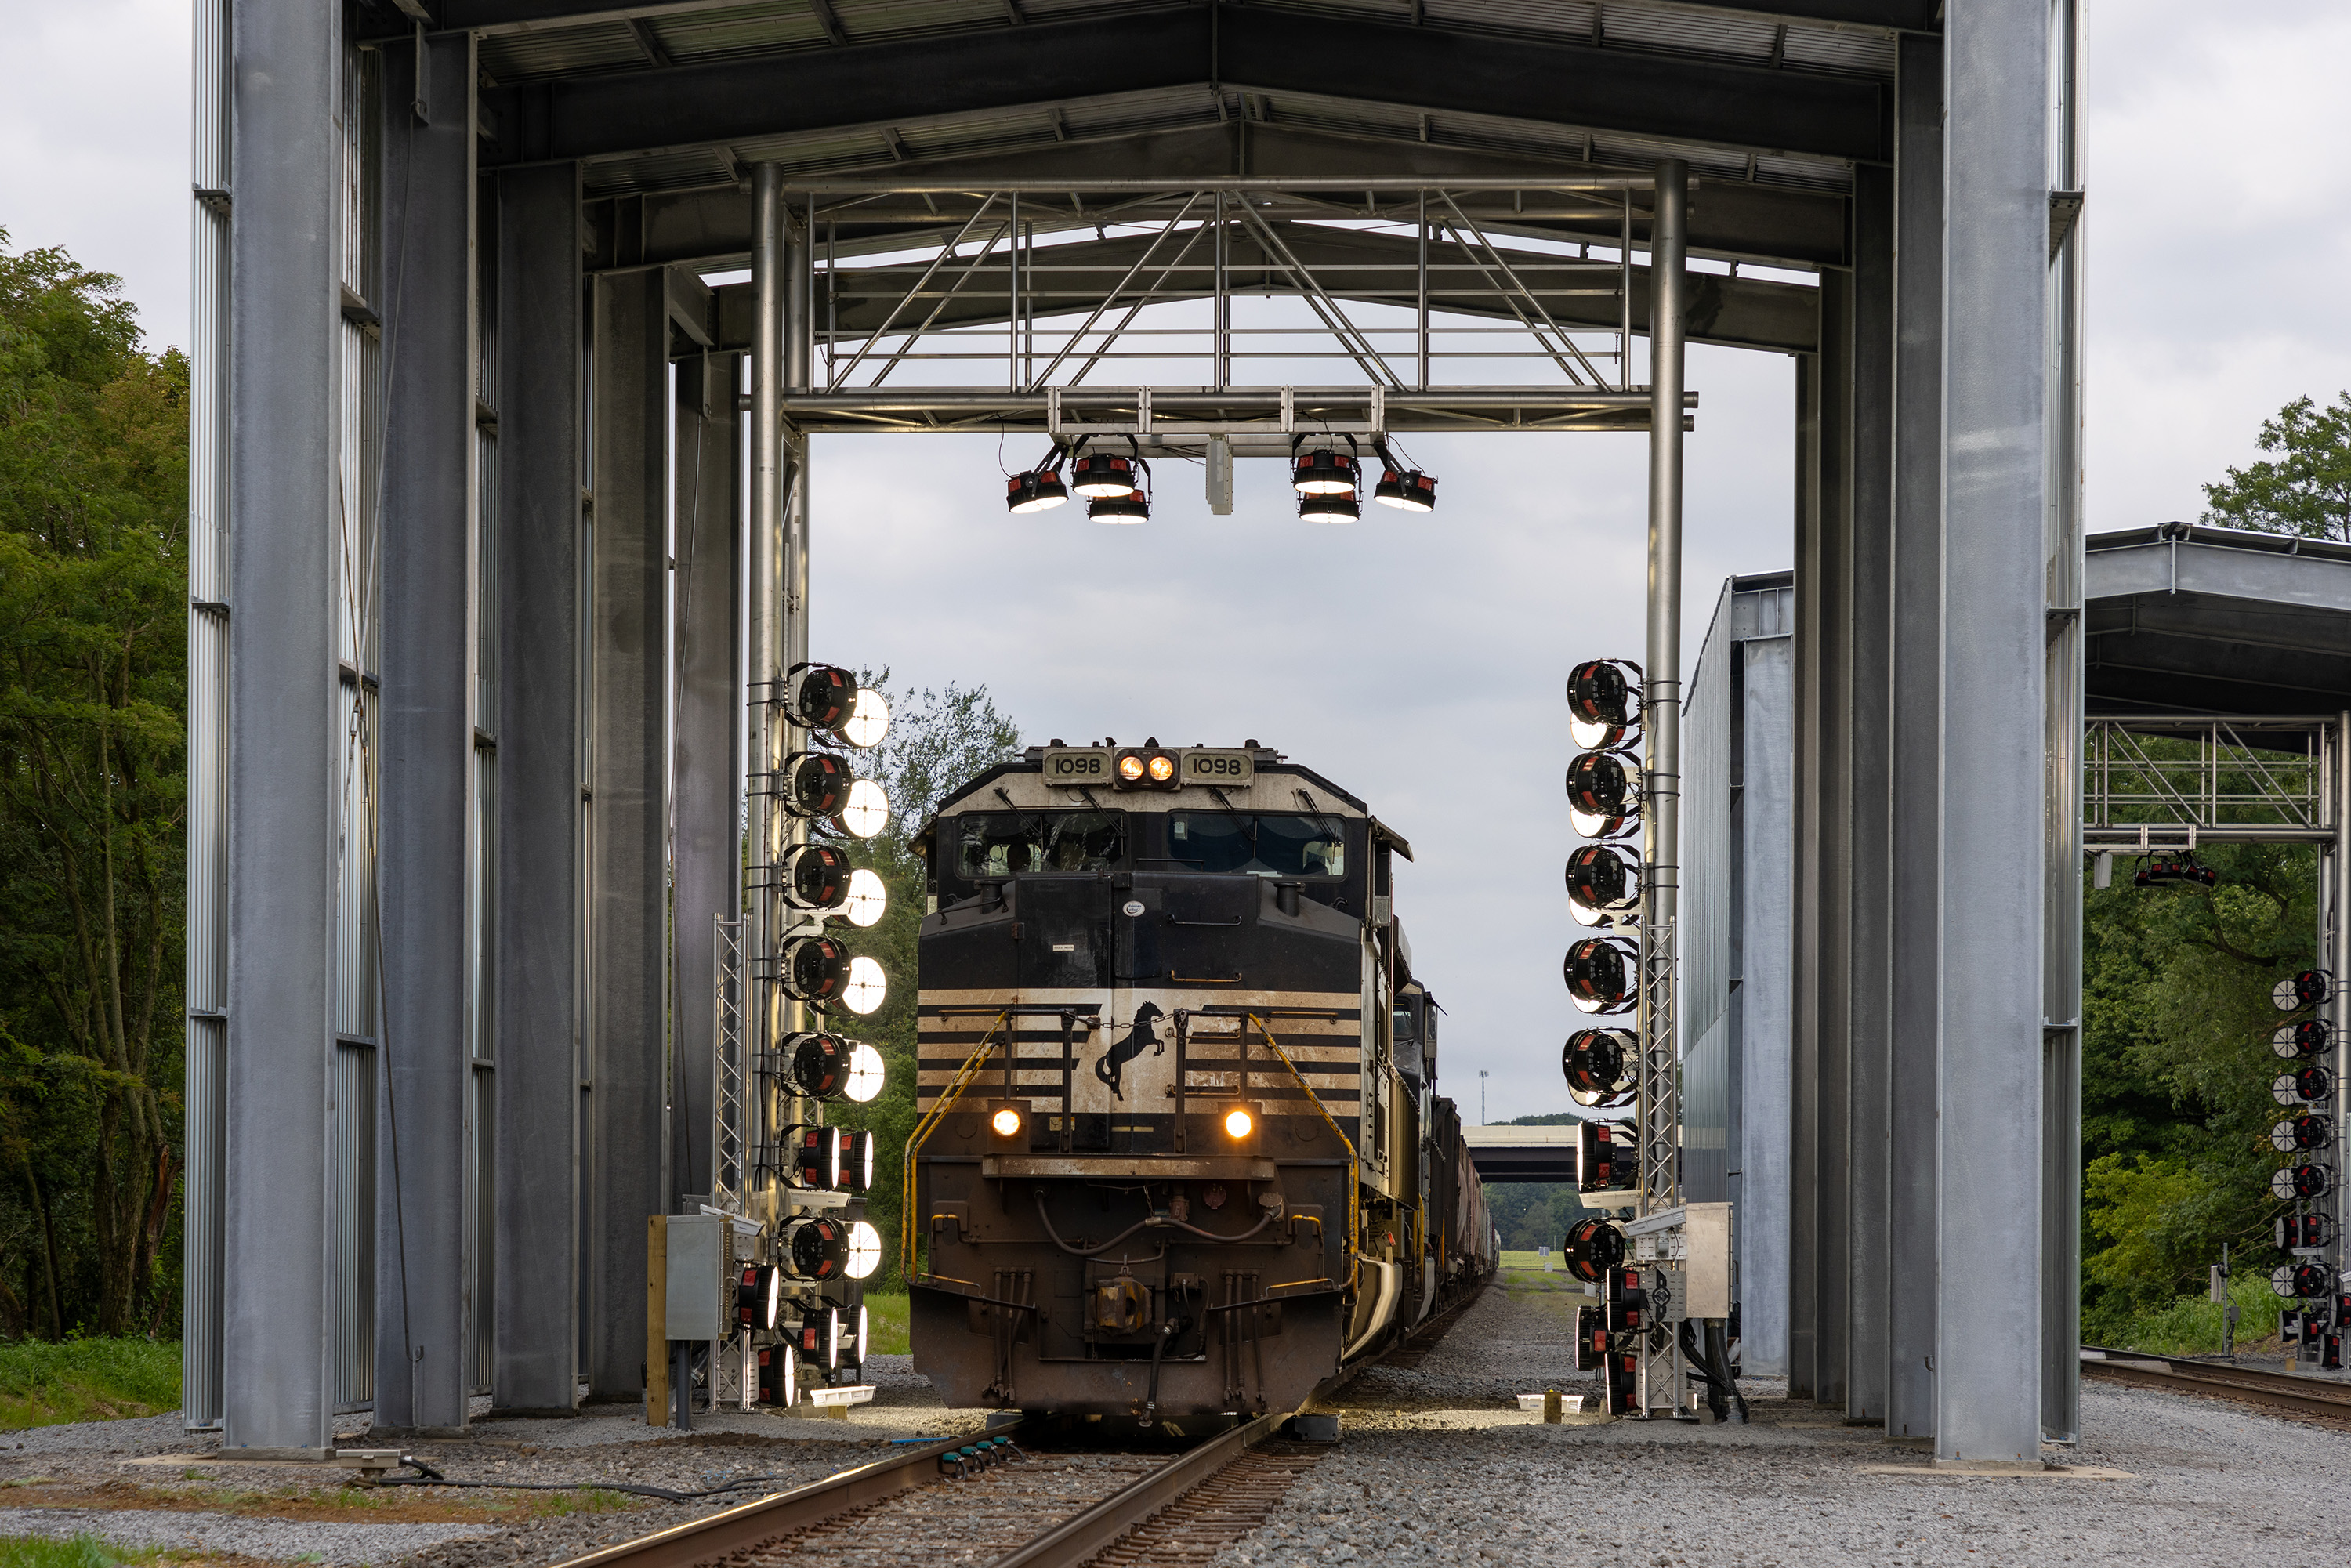 Photo of train inside metal portal structure.